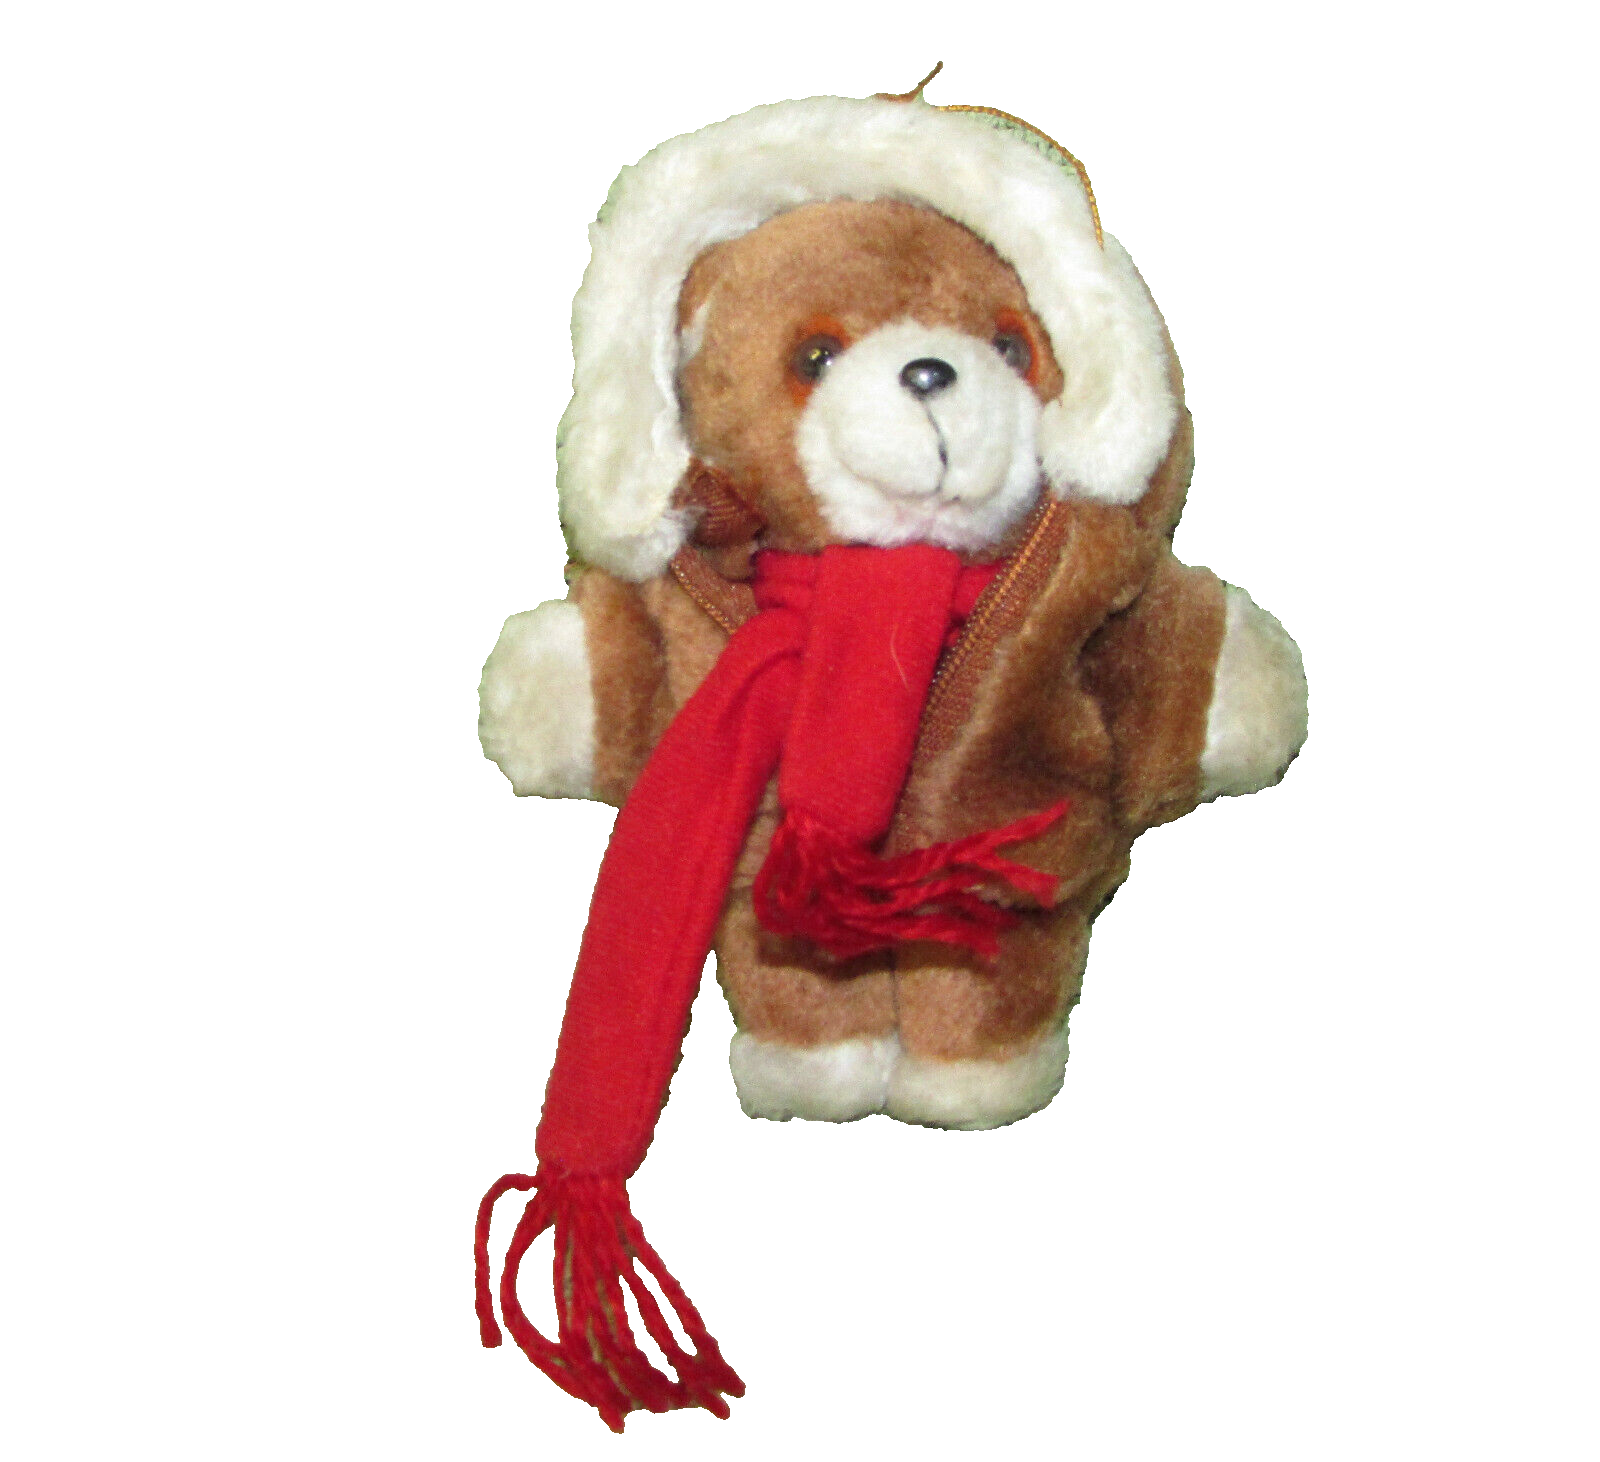 5" VINTAGE INTERPUR DOG PLUSH TAN BROWN w/ZIPPERED JACKET RED SCARF ORNAMENT TOY - $13.50